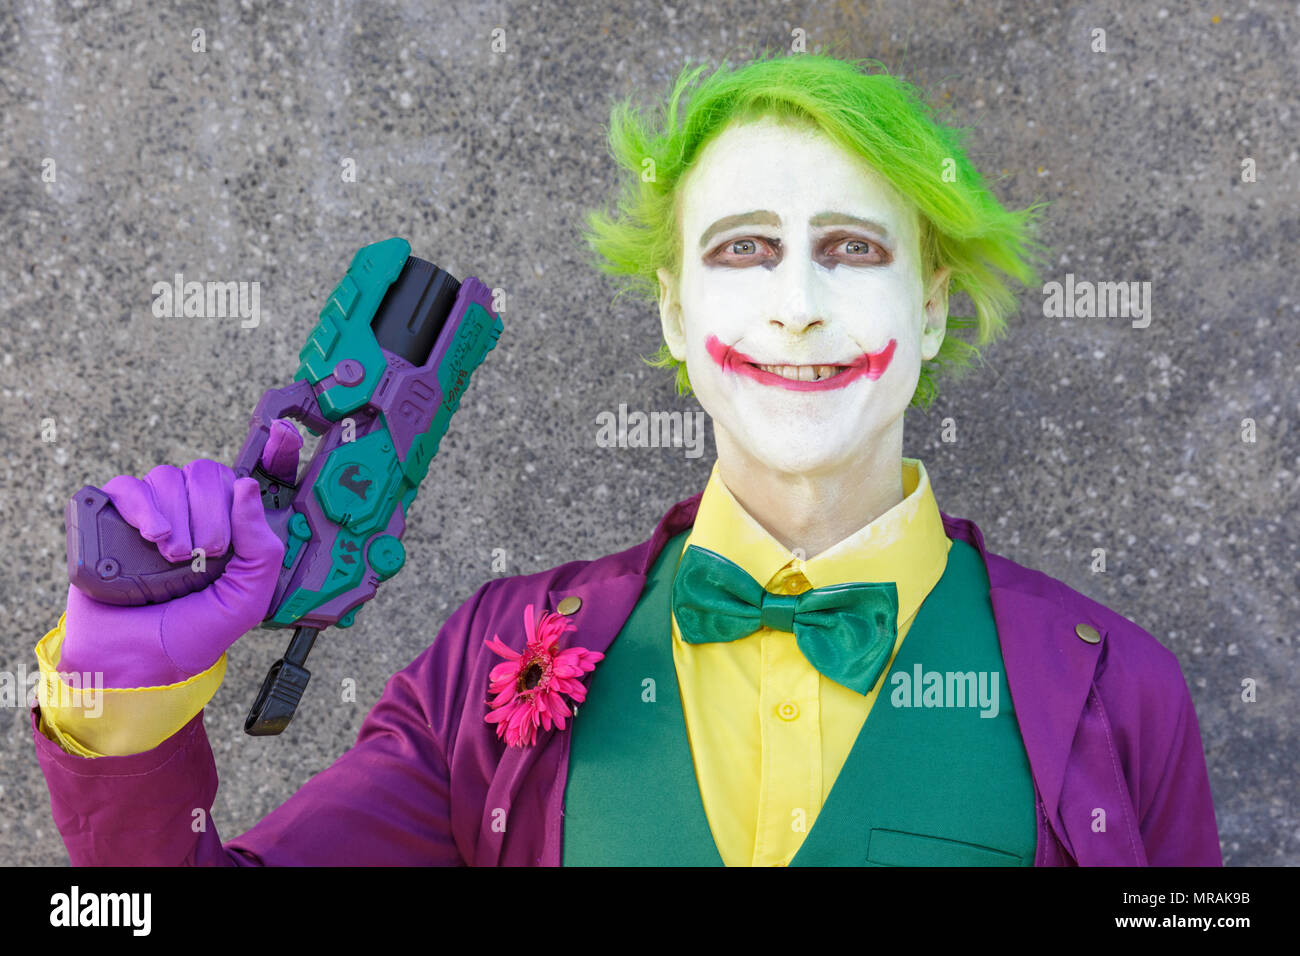 ExCel, London, 26th May 2018. The Joker from Batman Dark Knight Rises makes a his appearance with a bang! Cosplayers, Comic Characters, superheros and costumed visitors come together for MCM Comicon 2018 on the second day, a busy Saturday, running at ExCel Exhibition Centre May 25-27th. Credit: Imageplotter News and Sports/Alamy Live News Stock Photo